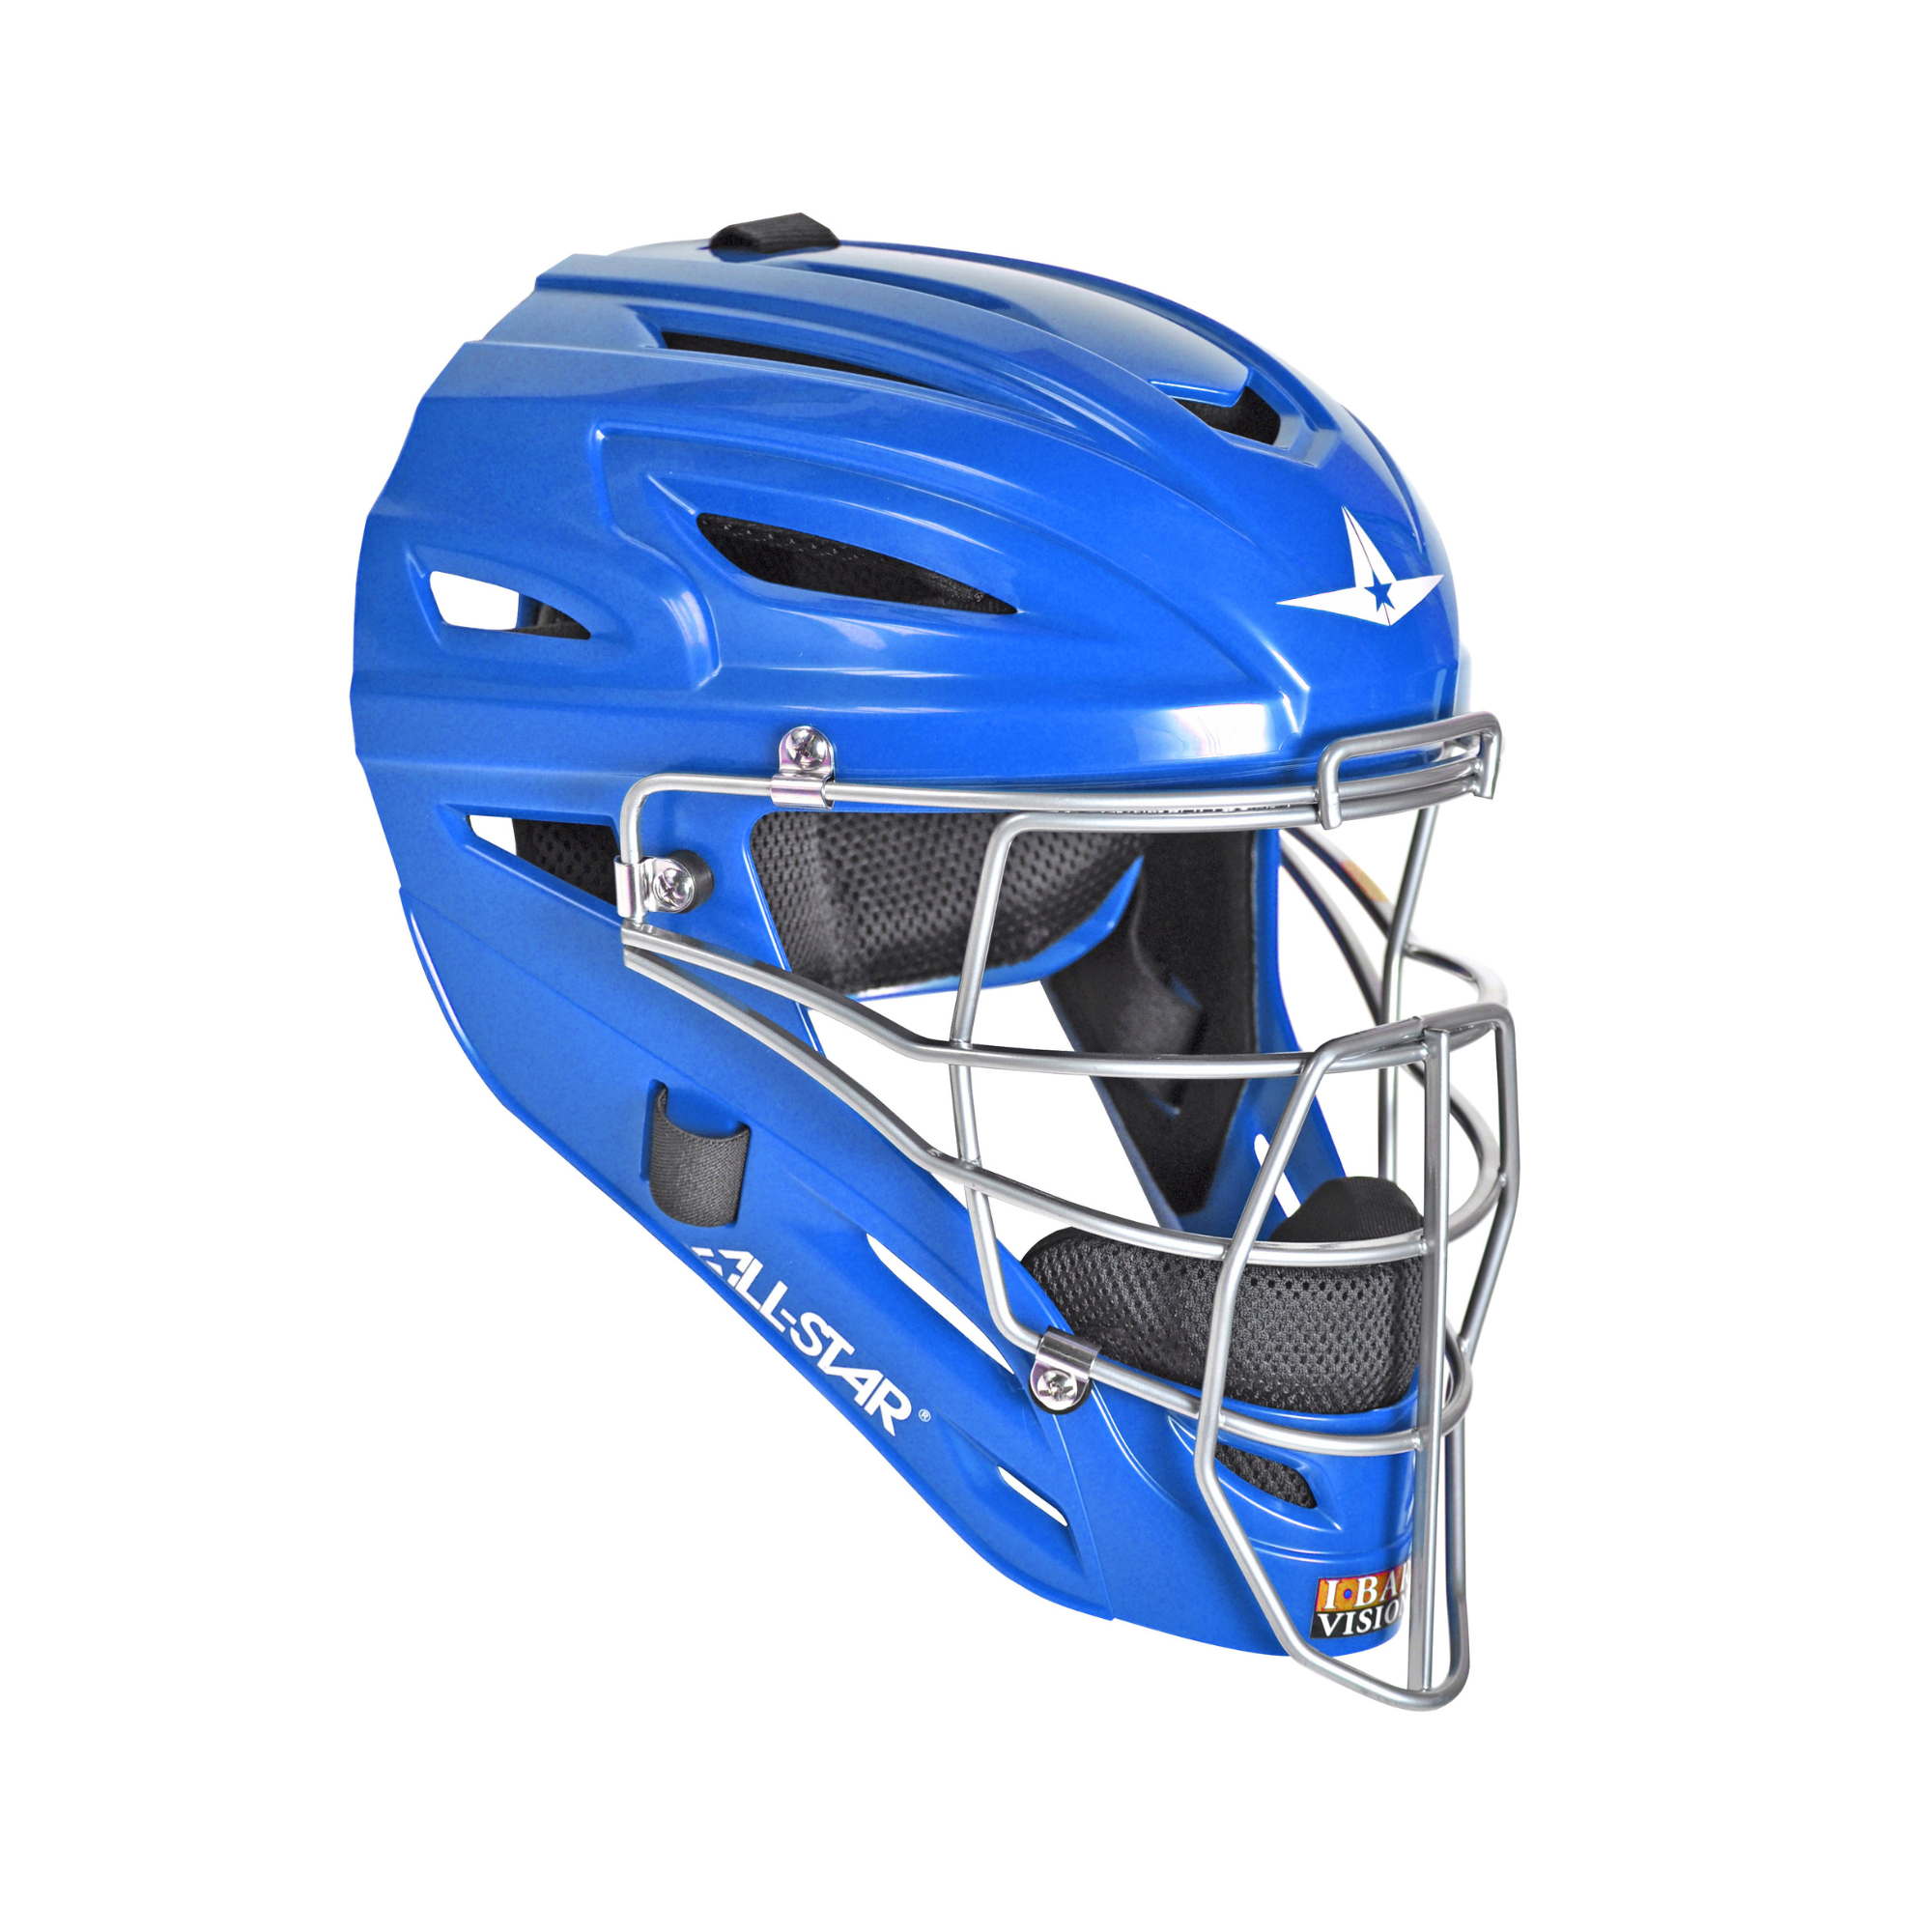 All-Star S7 Axis / Helmets / Ages 12-16